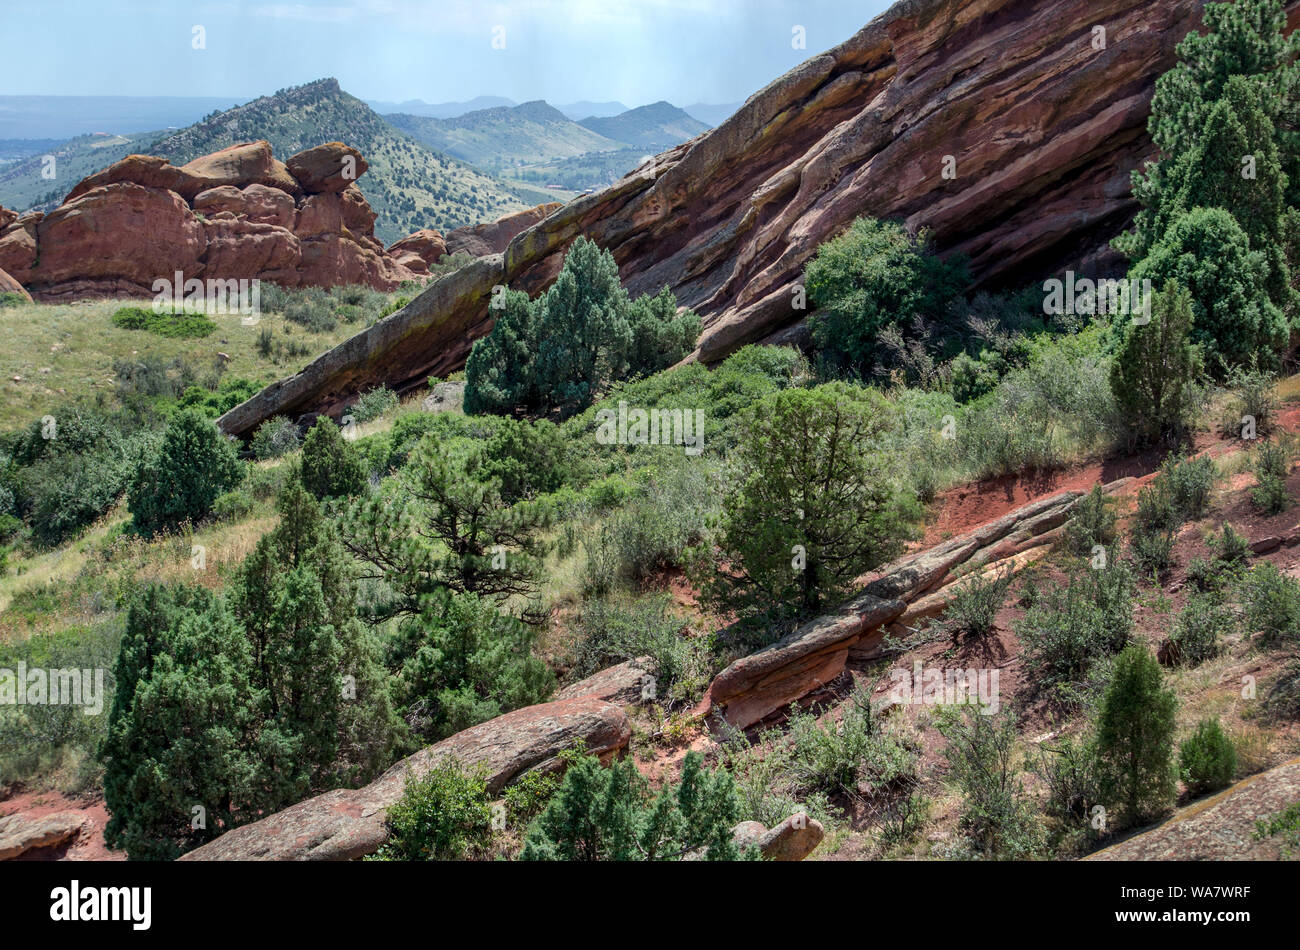 Red rocks park in Morrison Colorado, is a breathtaking landscape of massive sandstone boulders and rocky hills, at the base of the Rocky Mountains in Stock Photo